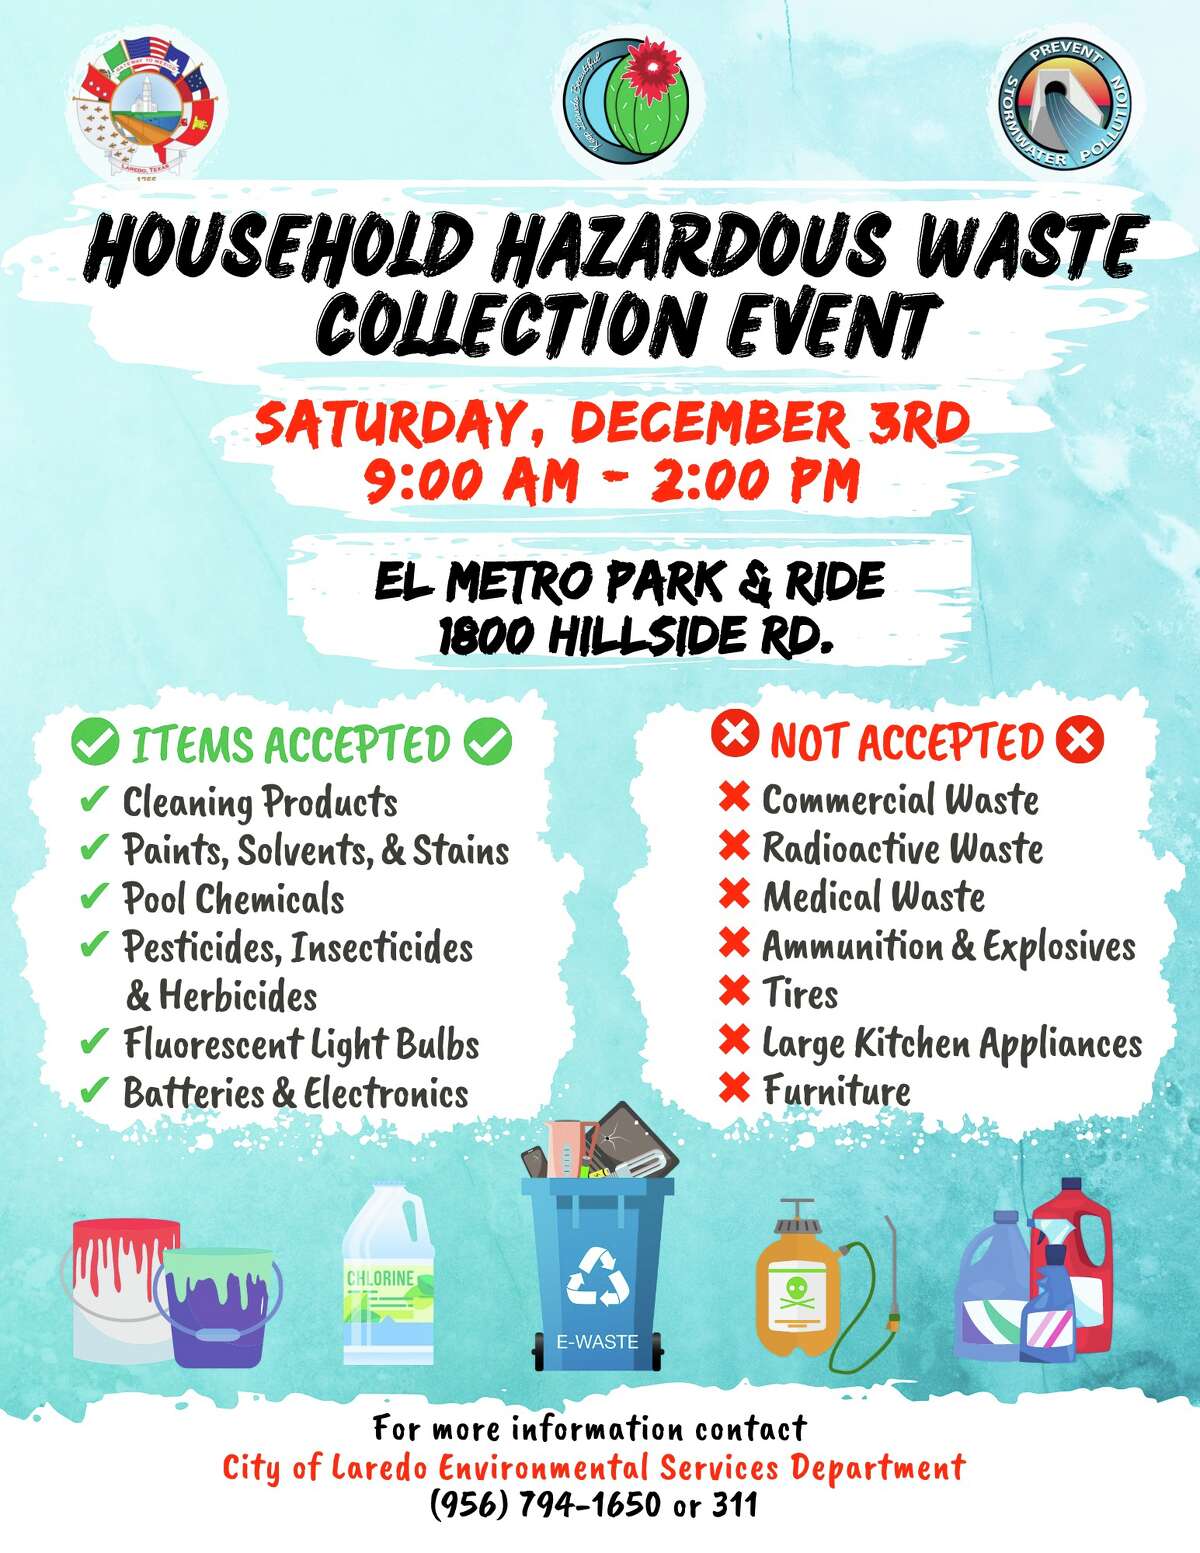 As hazardous waste can cause pollution and damage to the environment and community’s health, the City of Laredo Enviromental Services, encourages the community to bring any dangerous waste on an effort to collect these materials for proper disposal on Saturday, December 3rd, 2022.